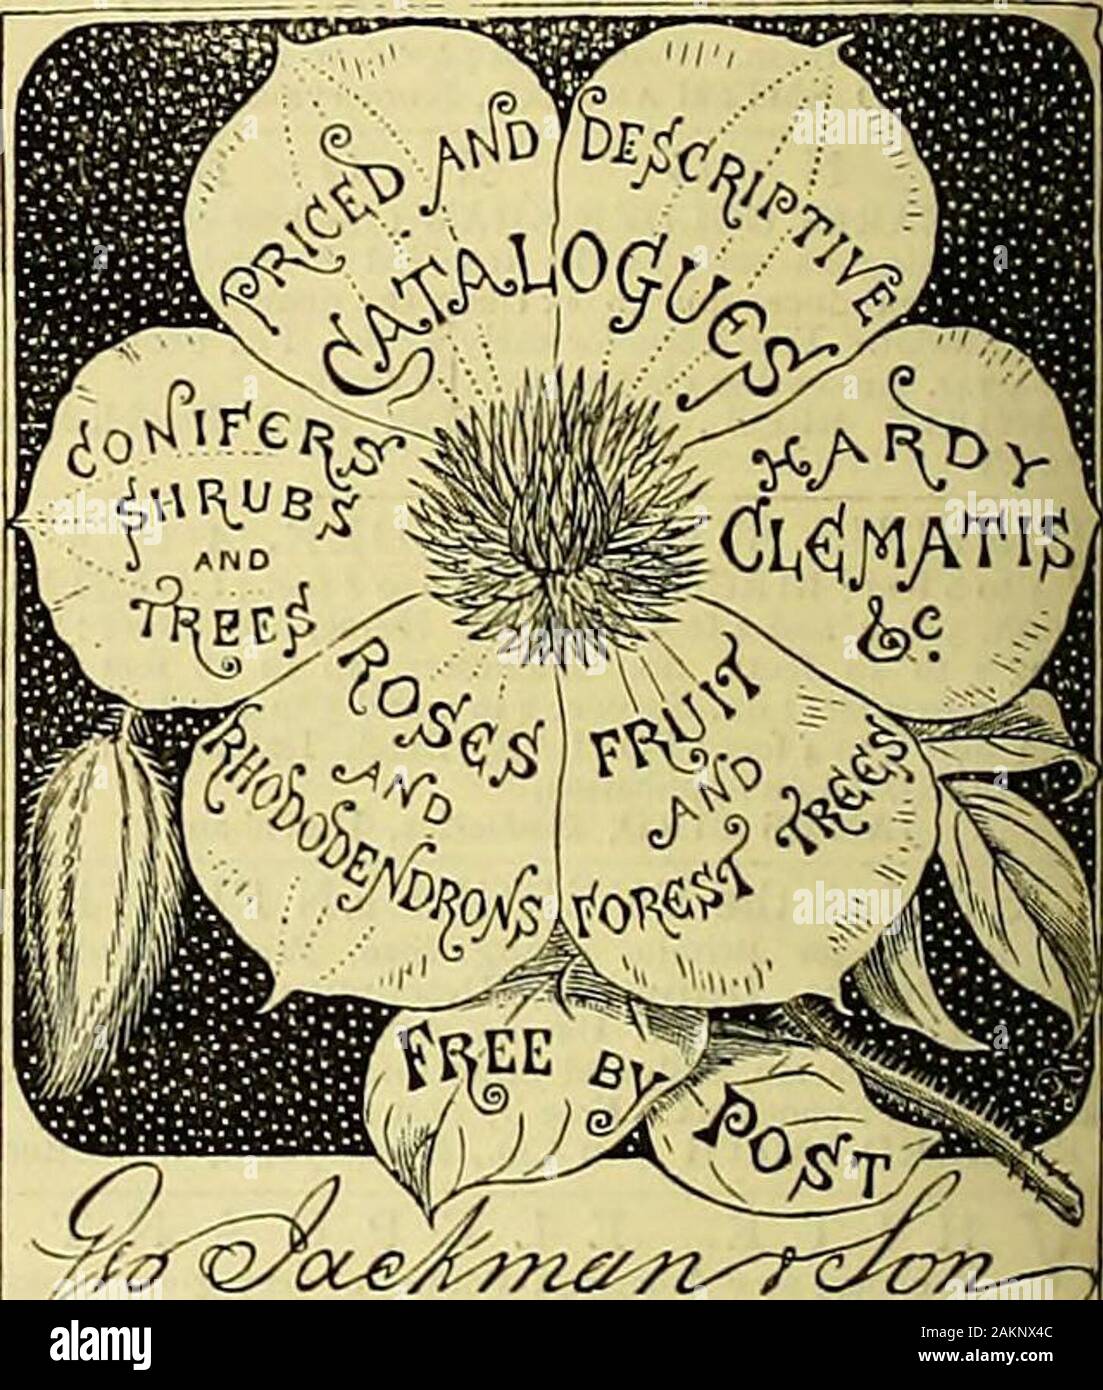 The Gardeners' chronicle : a weekly illustrated journal of horticulture and allied subjects . althamEastern Ra Station, Greatilway.) WM. PAUL & SON (Successors to the late A. Paul & Son), Est.ibli,shed 1806. Invite attention to the follow-ing articles, which they continue to makeobjects of special care and attention :— A. ROSES. B. EVERGREENS, CONIFERS, ORNA- MENTAL TREES, CLIMBINGPLANTS, &c. C. FRUIT TREES, including GRAPE VINES and STRAWBERRIES. D. HYACINTHS, TULIPS, and other BULBS, CAMELLIAS, &c. E. Special List of the above for large Buyers/•.NEW ROSES, GERANIUMS, PHLOXES, DAHLIAS, &c.G. Stock Photo